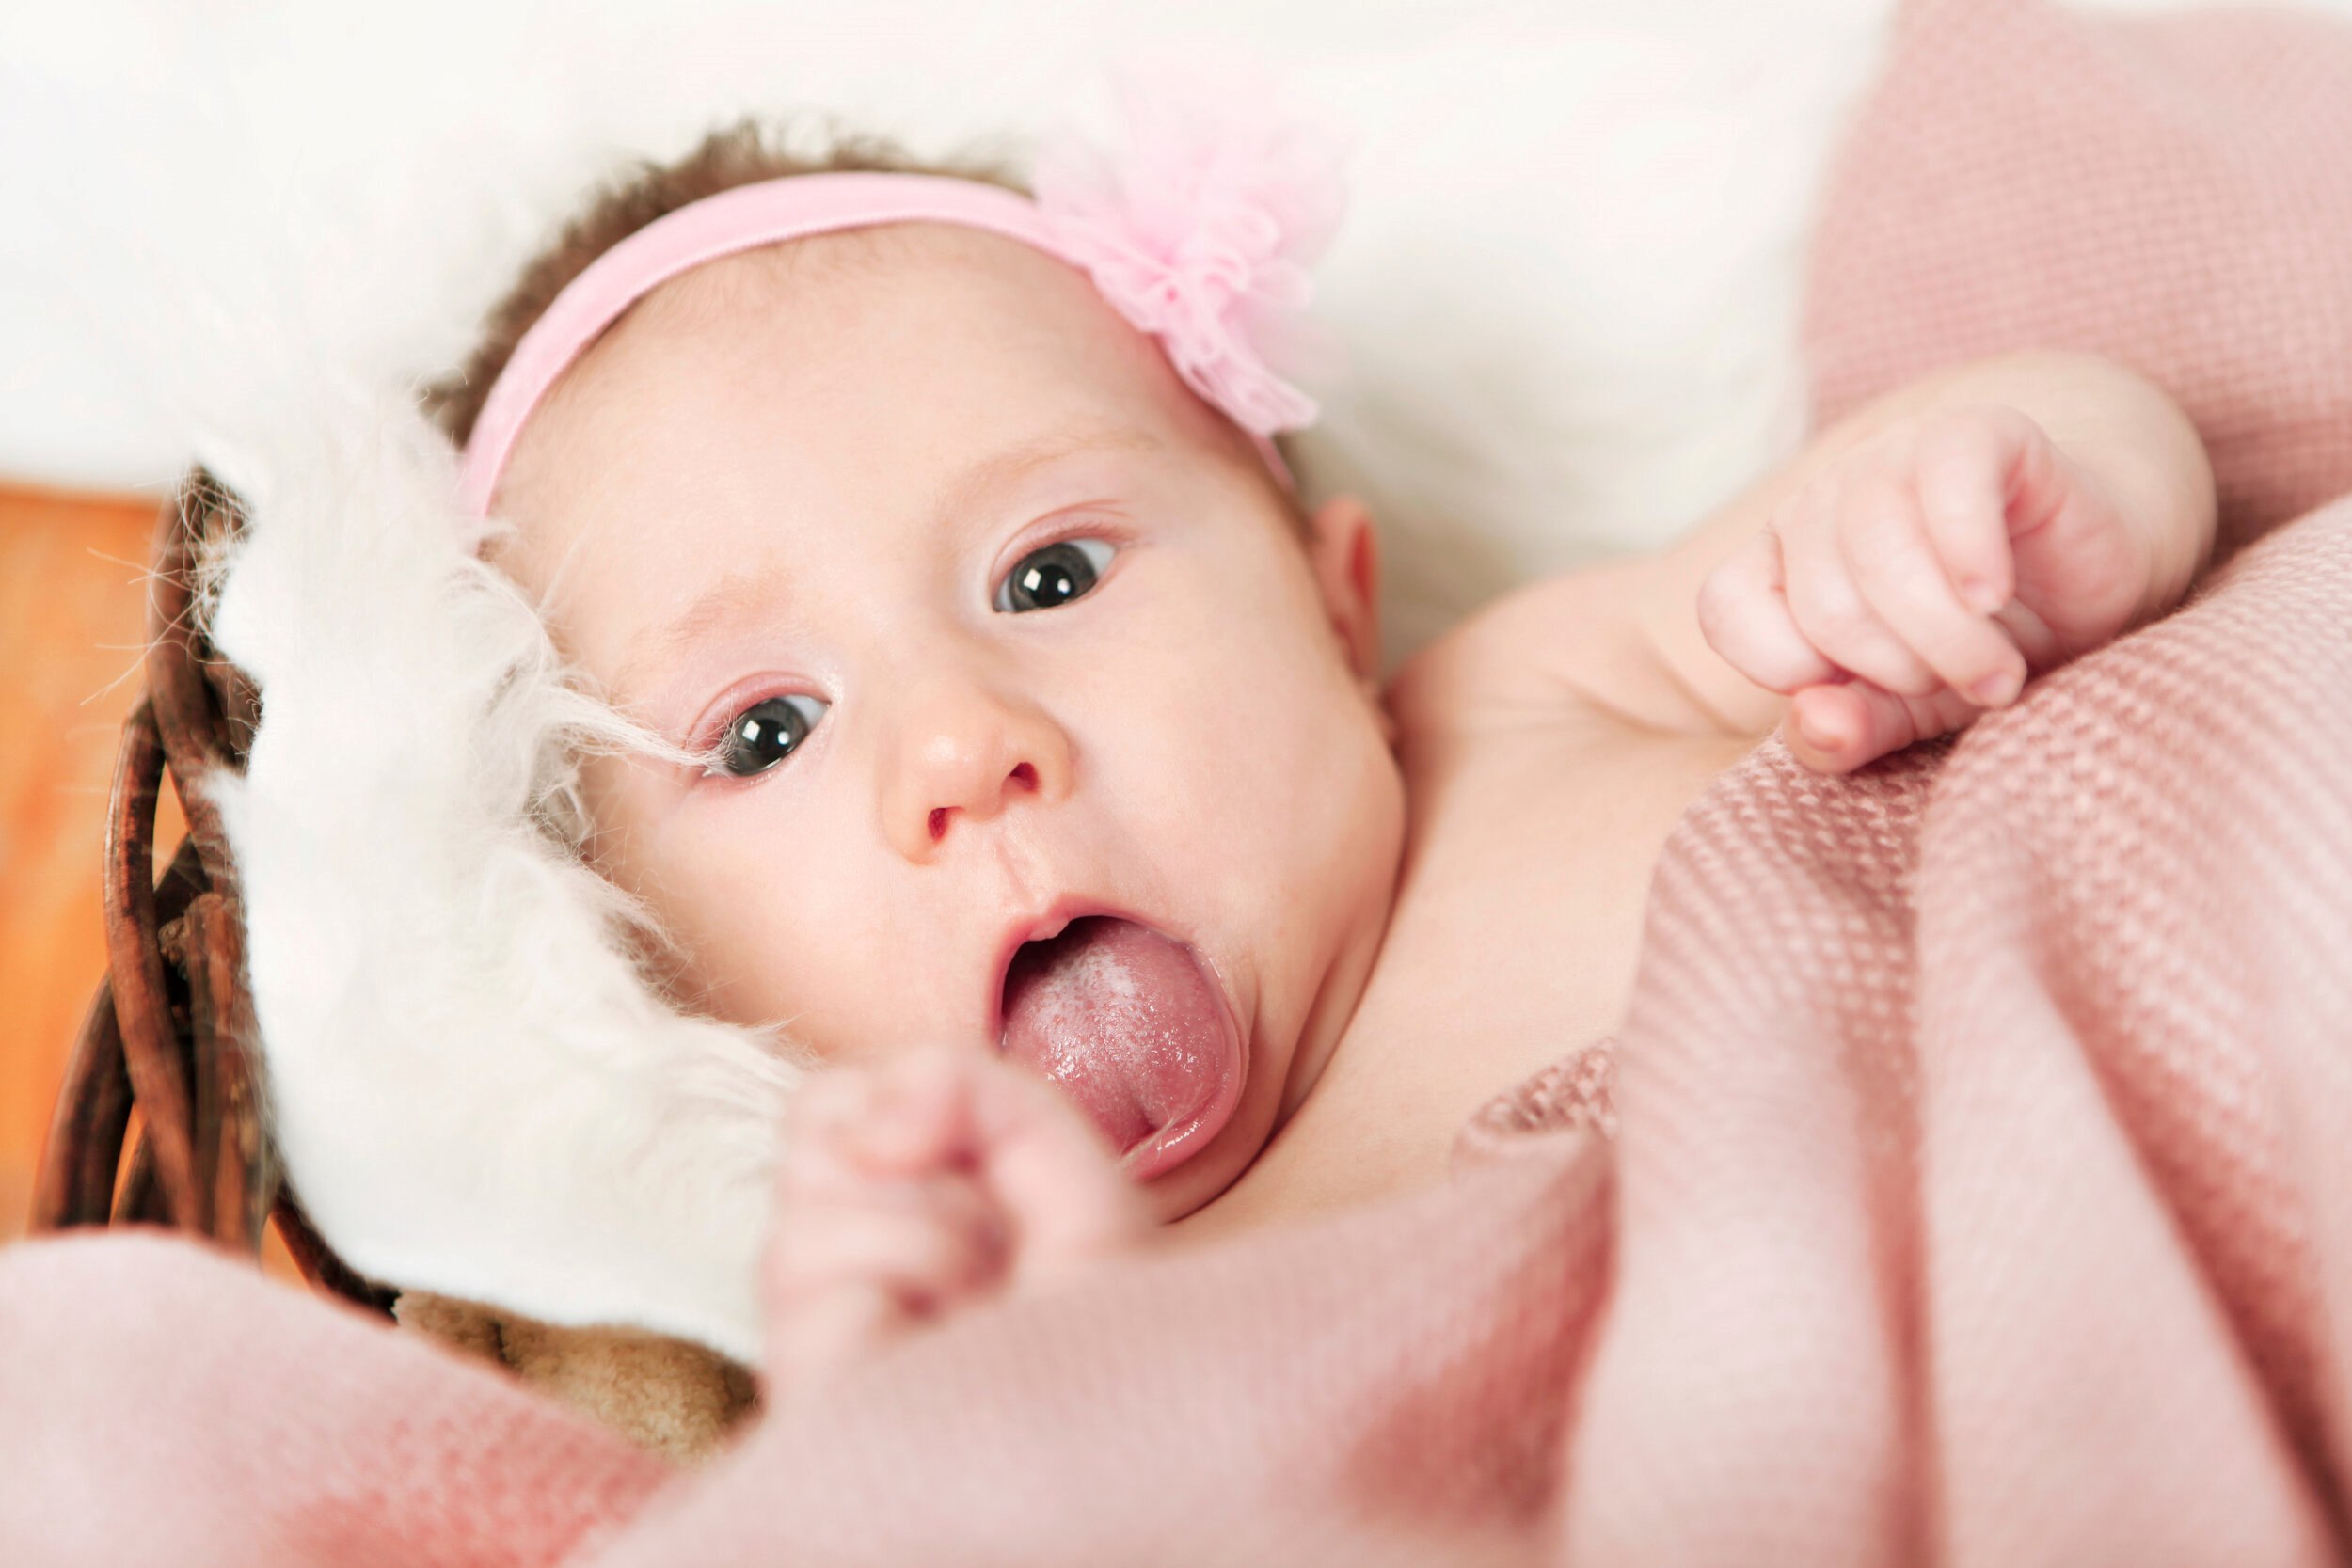 You Won't Believe Why Babies Are Clicking Their Tongues!